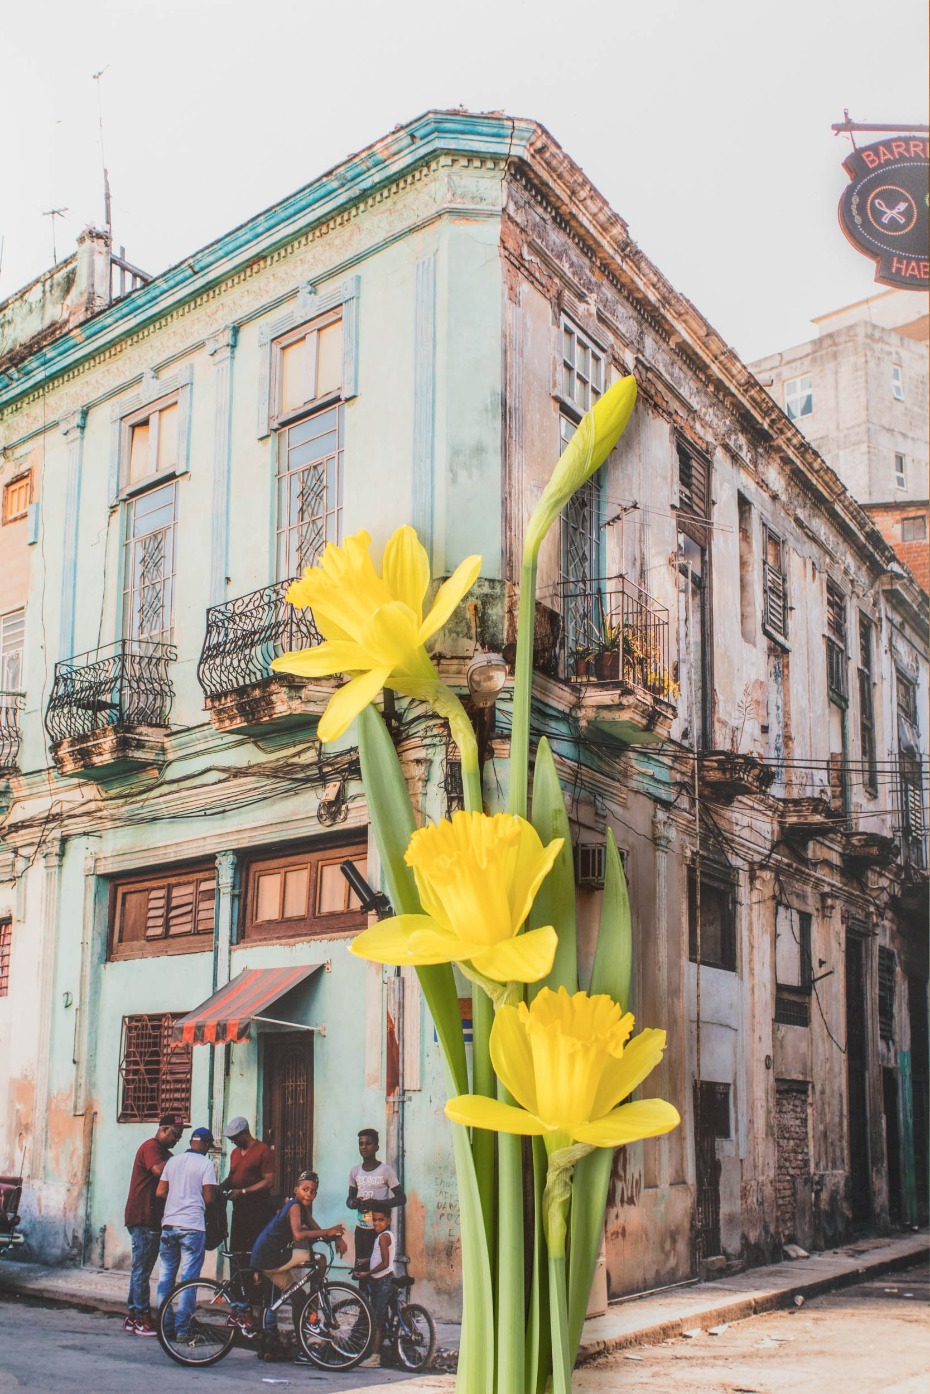 The beauty of Old Havana with fresh blooms